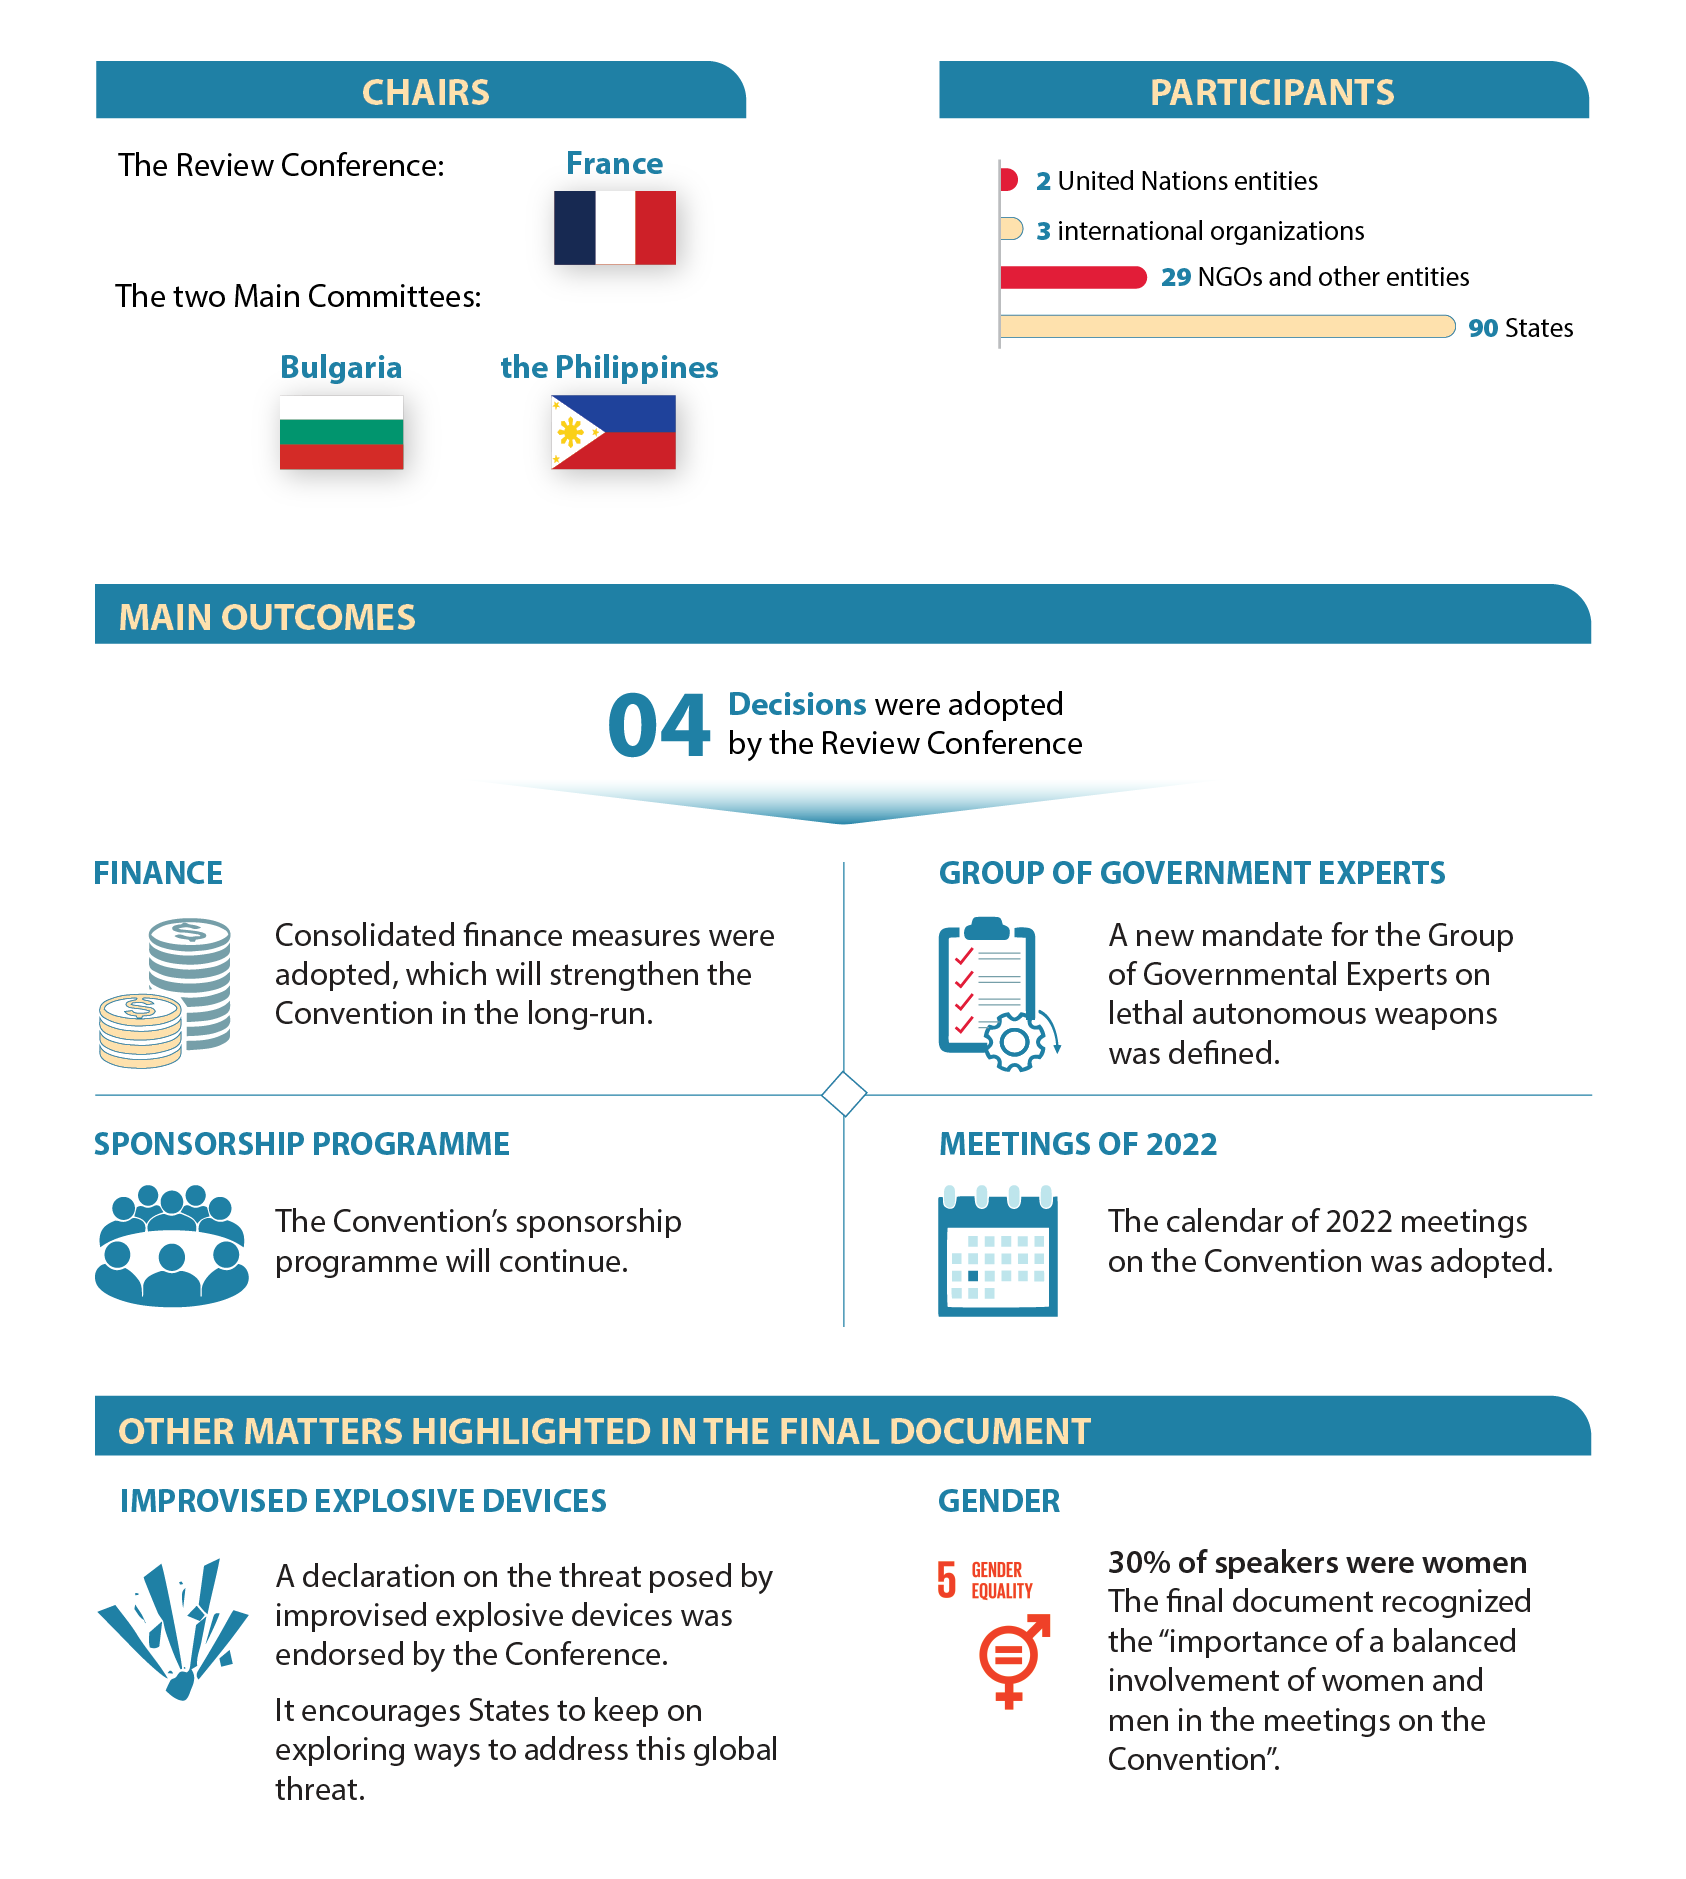 Infographic with highlights of the Conference: Chairs, bar graph of distribution of participants by entity type, main outcomes, other matters highlighted in the final document.